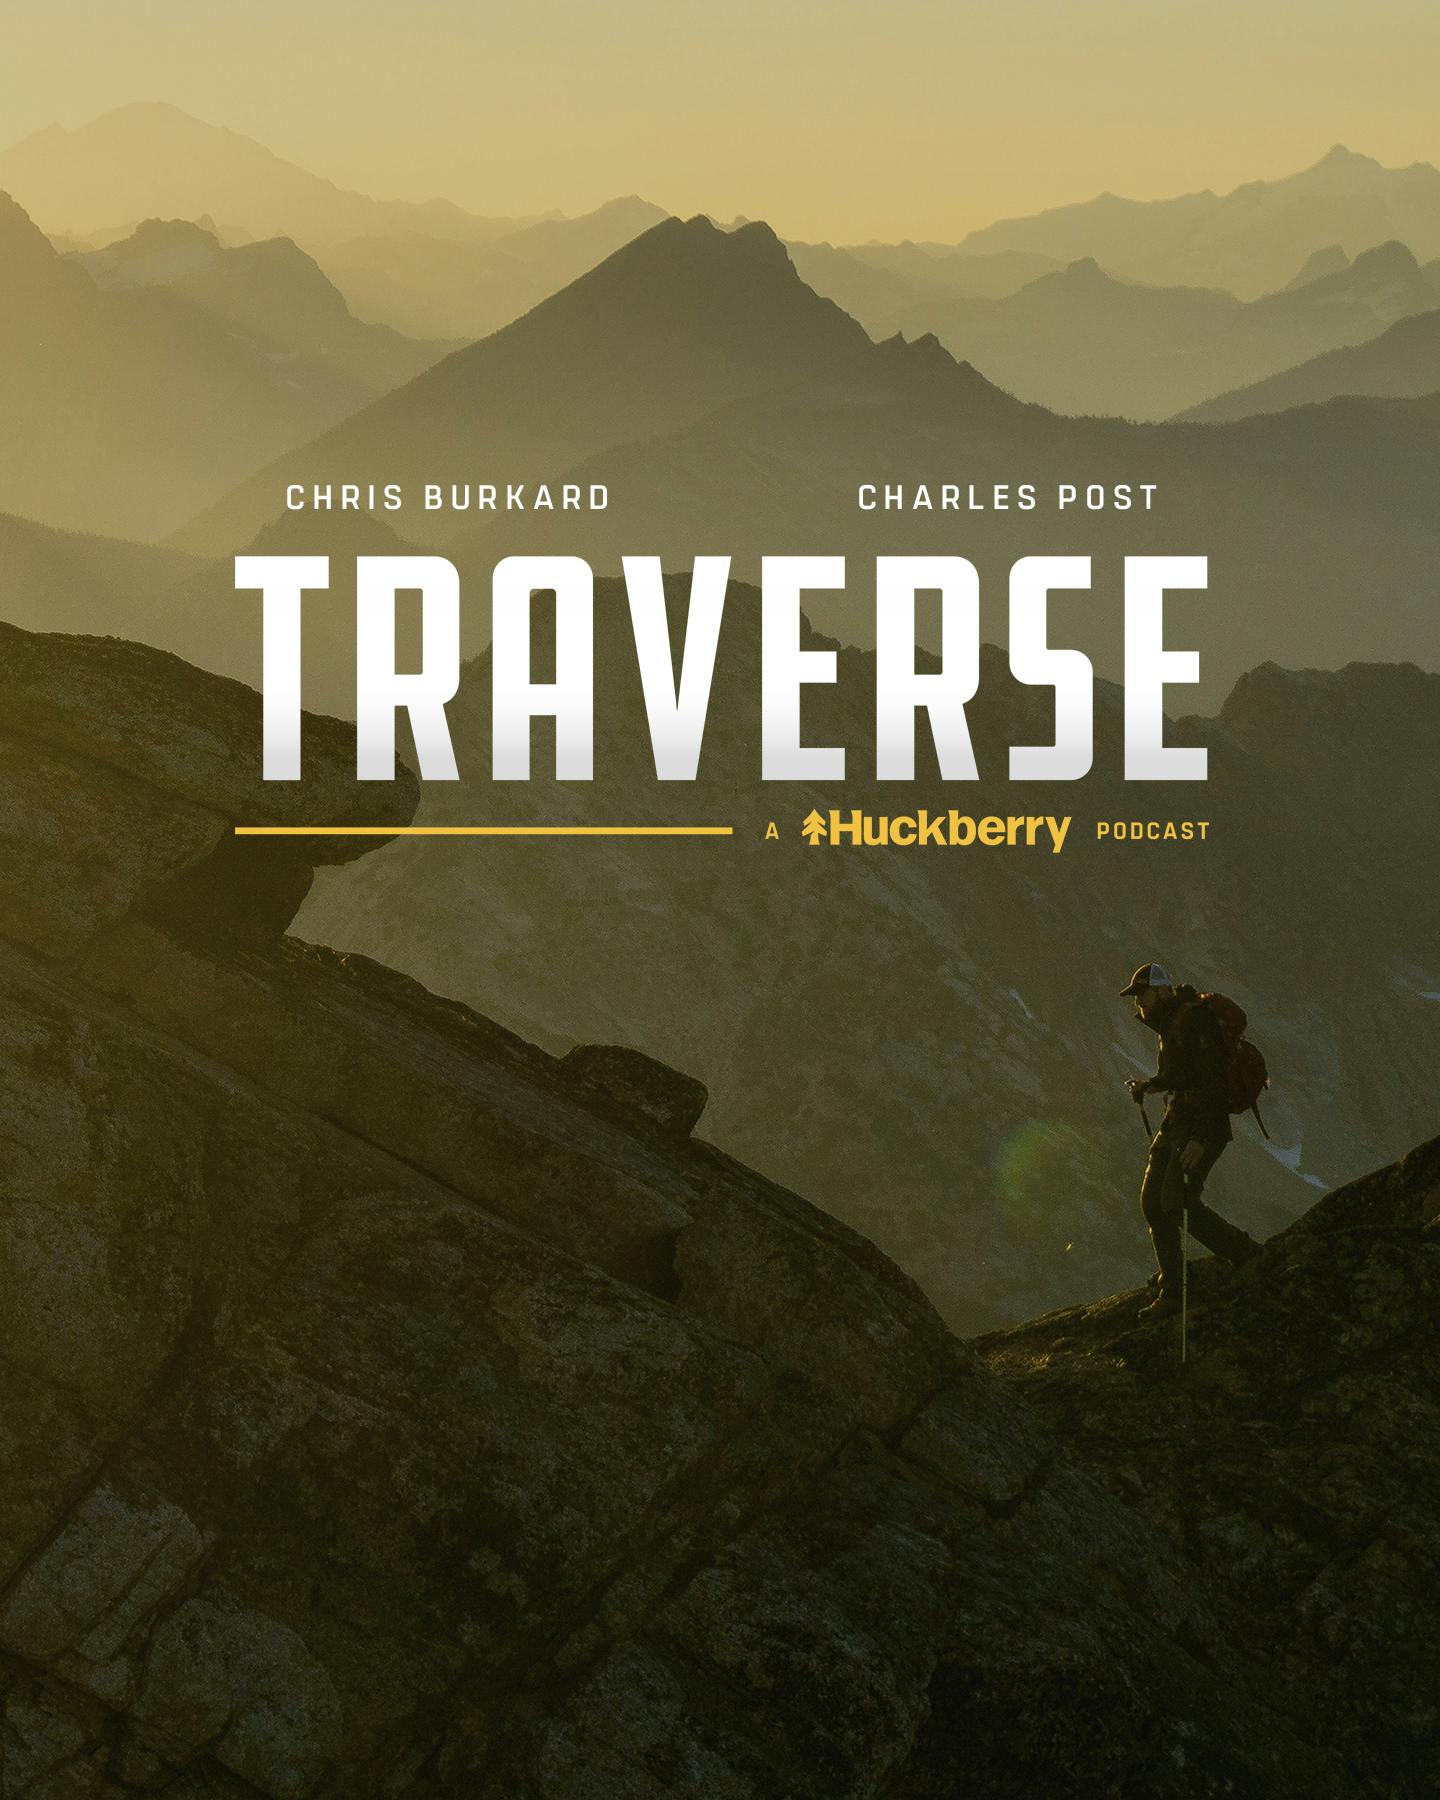 Traverse Podcast with Chris Burkard and Charles Post